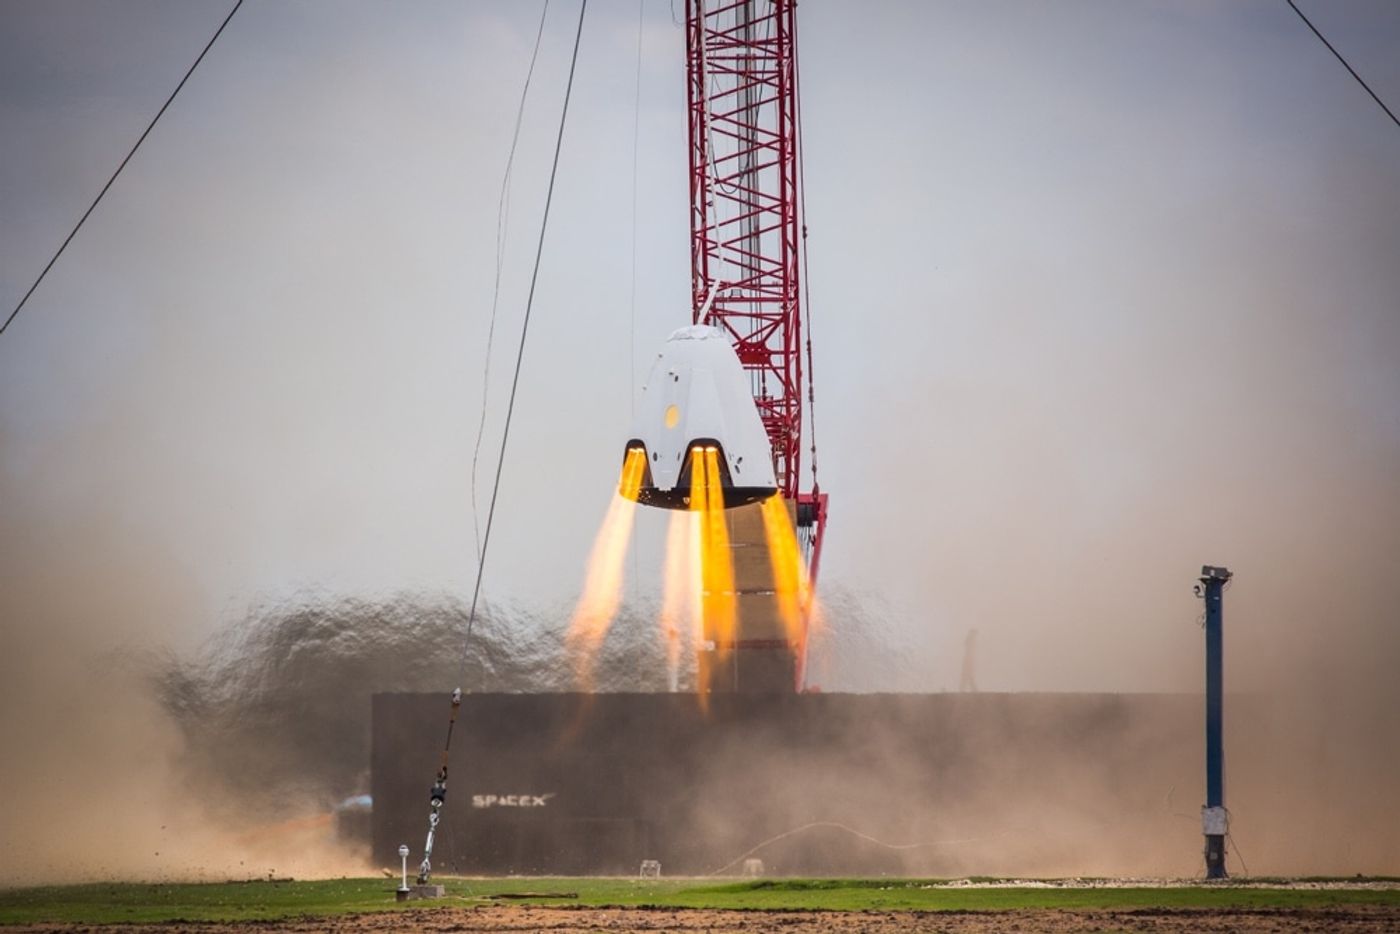 A SpaceX Crew Dragon capsule (formerly called Dragon 2) performing a hover test.